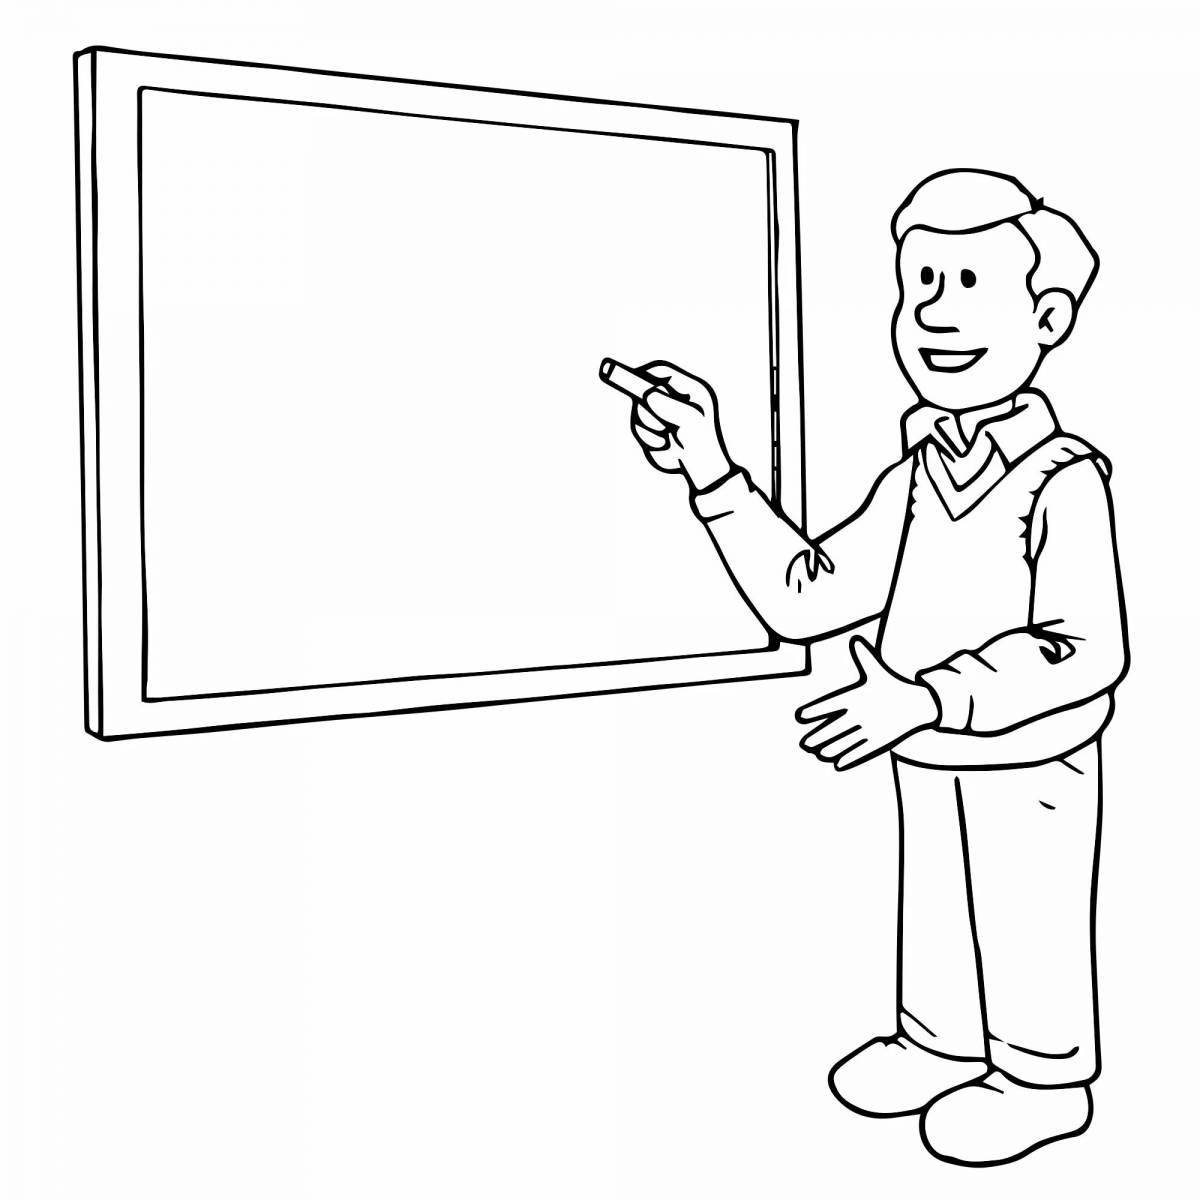 The teacher at the blackboard with a pointer #3